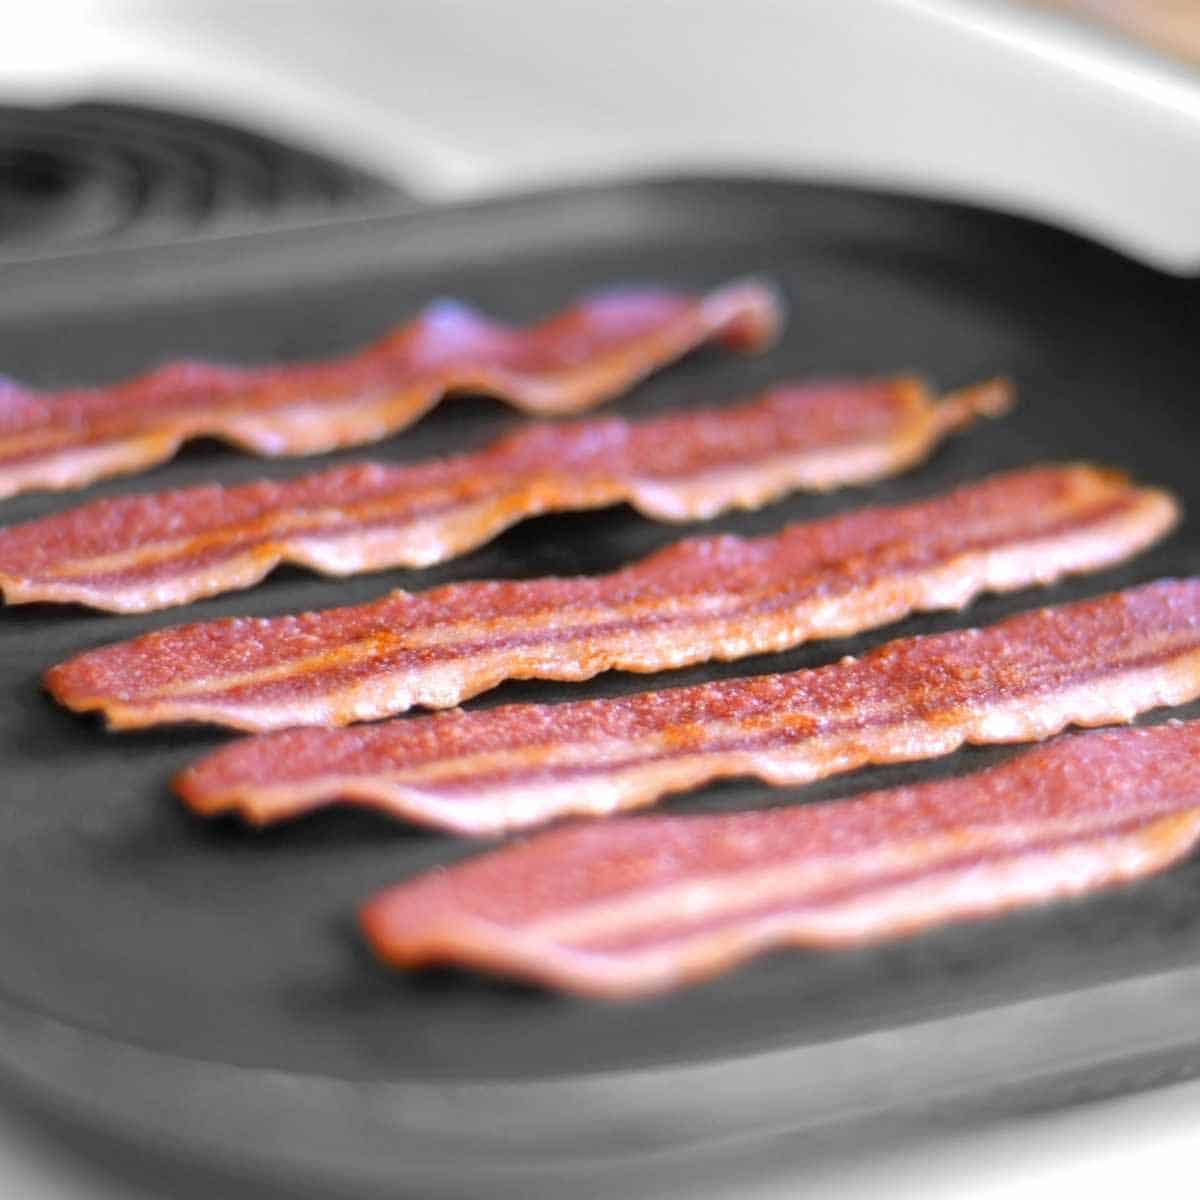 Five slices of turkey bacon reheated on a griddle.